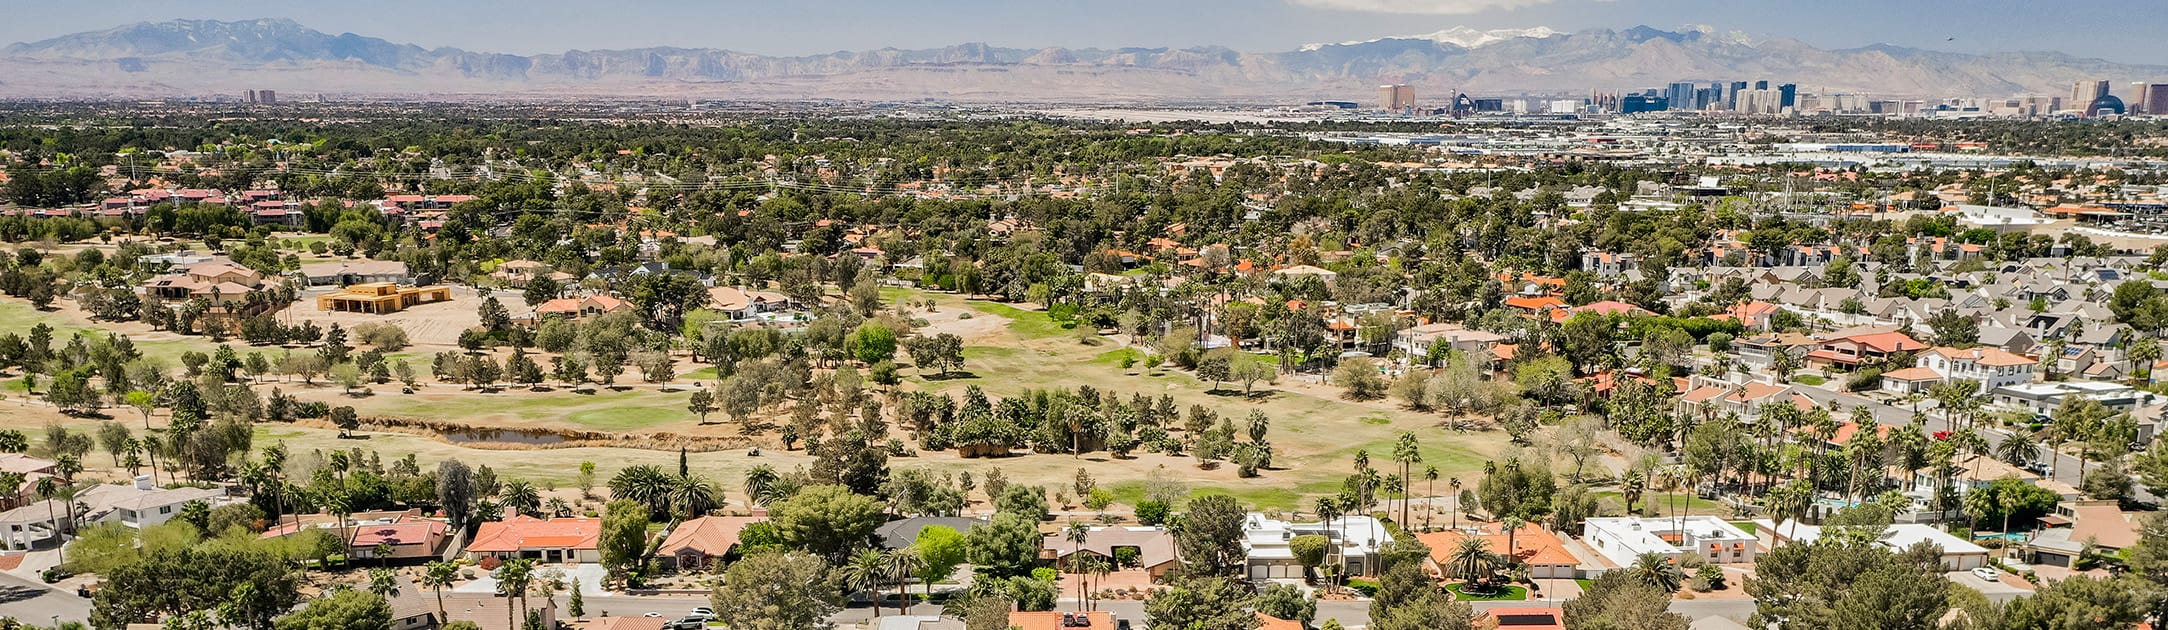 Aerial view of golf course and neighborhood with high rises and mountains in the background.